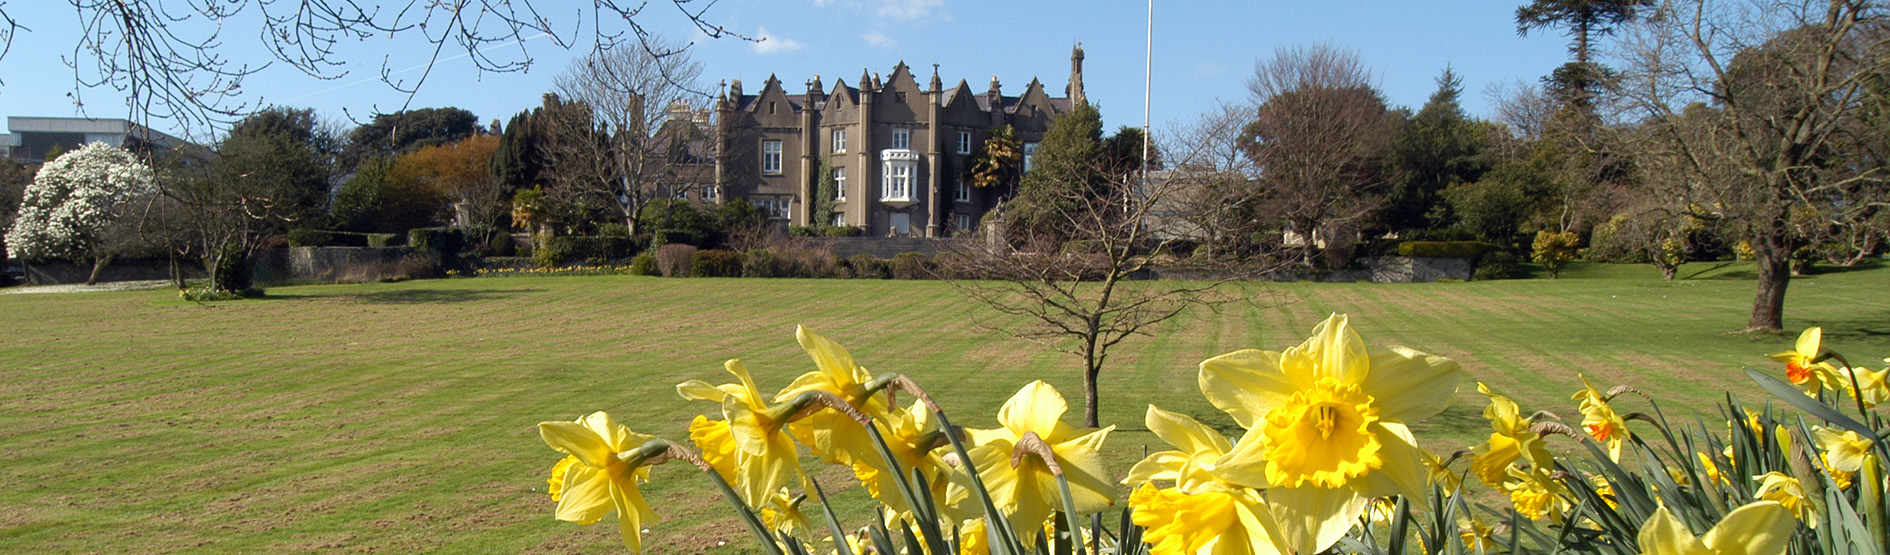 Singleton Abbey in the distance with daffodils in front